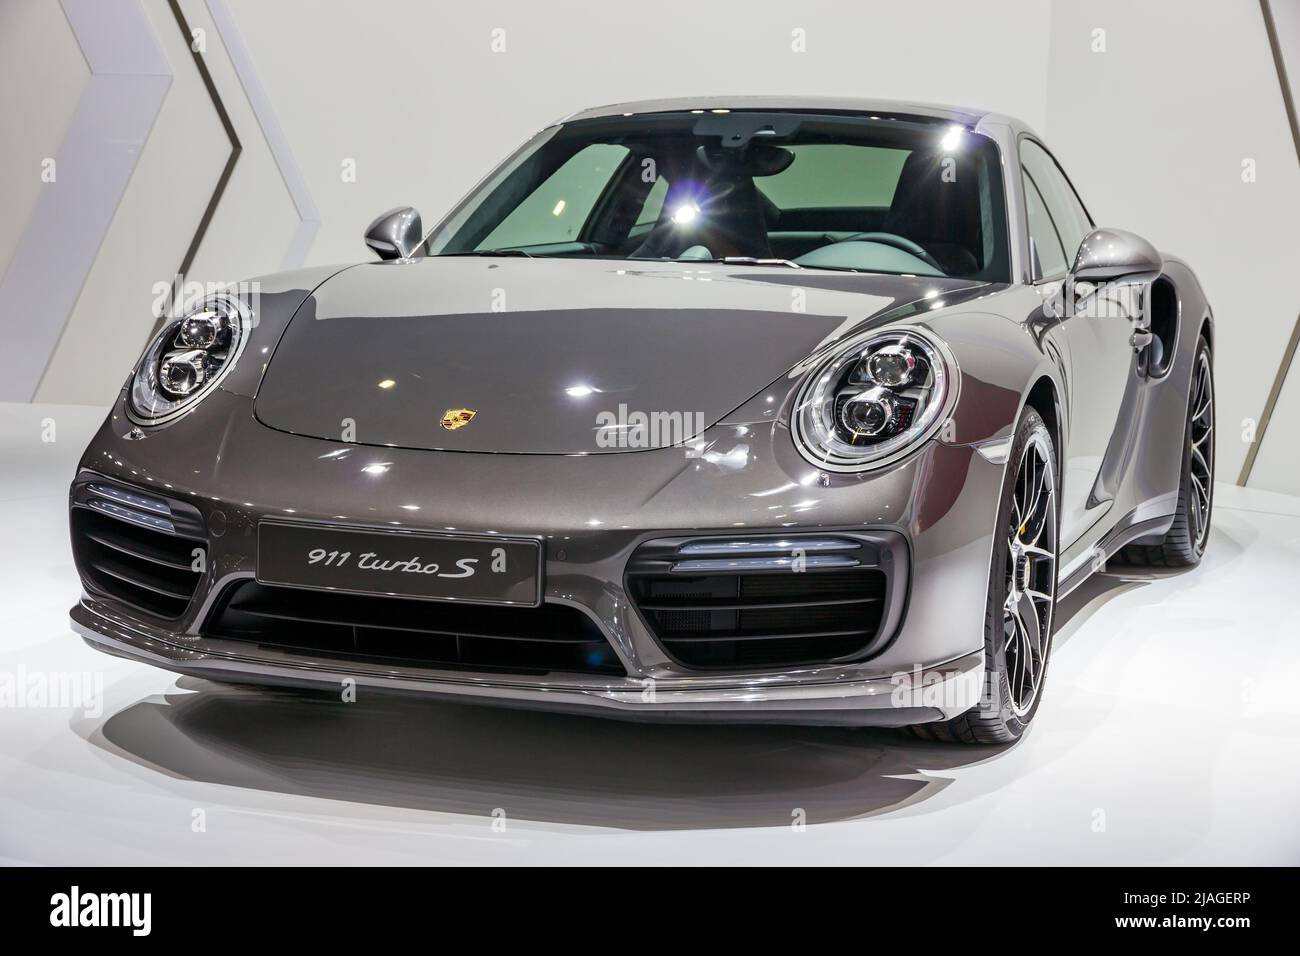 Porsche 911 Turbo S sports car at the Brussels Expo Autosalon motor show. Brussels - January 12, 2016. Stock Photo